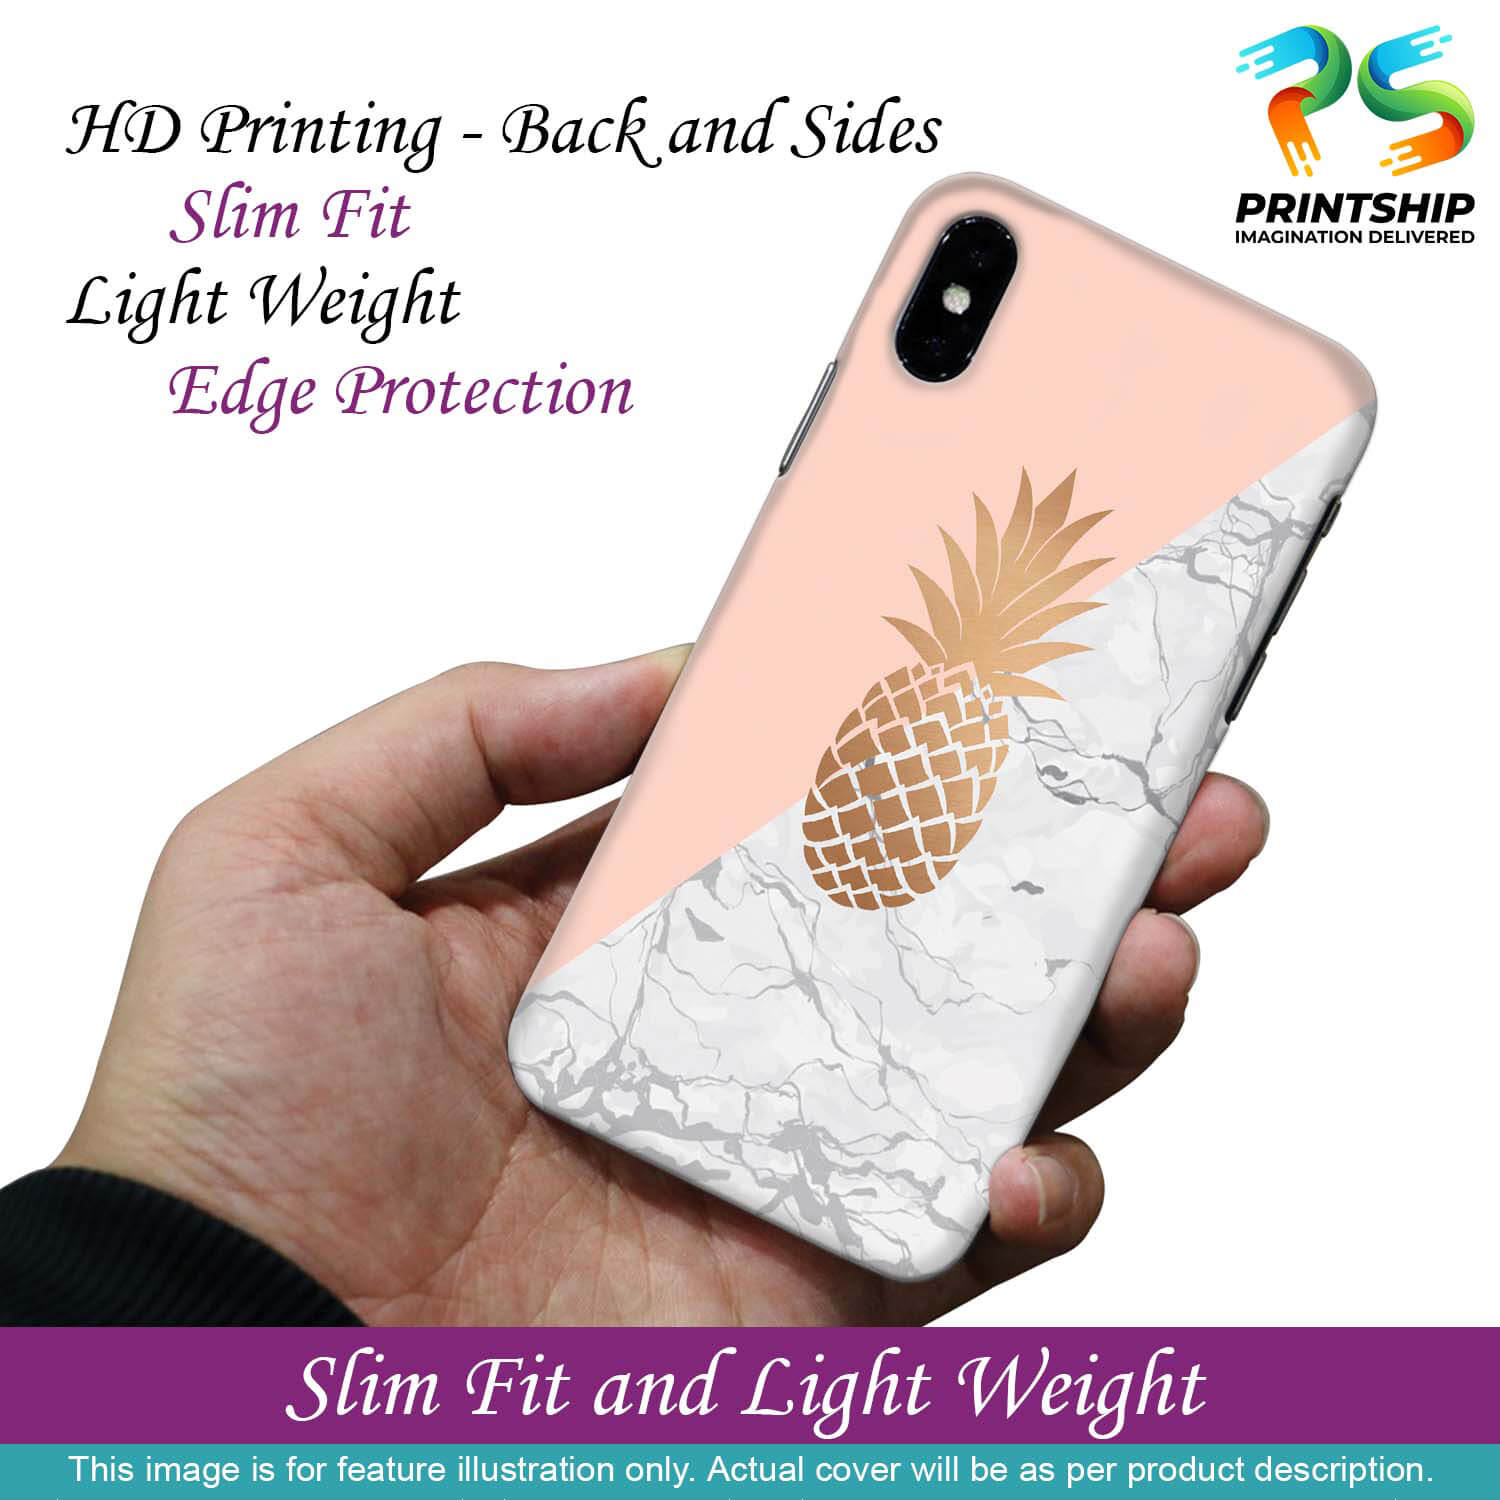 PS1330-Pineapple Marble Back Cover for Huawei Honor 8X